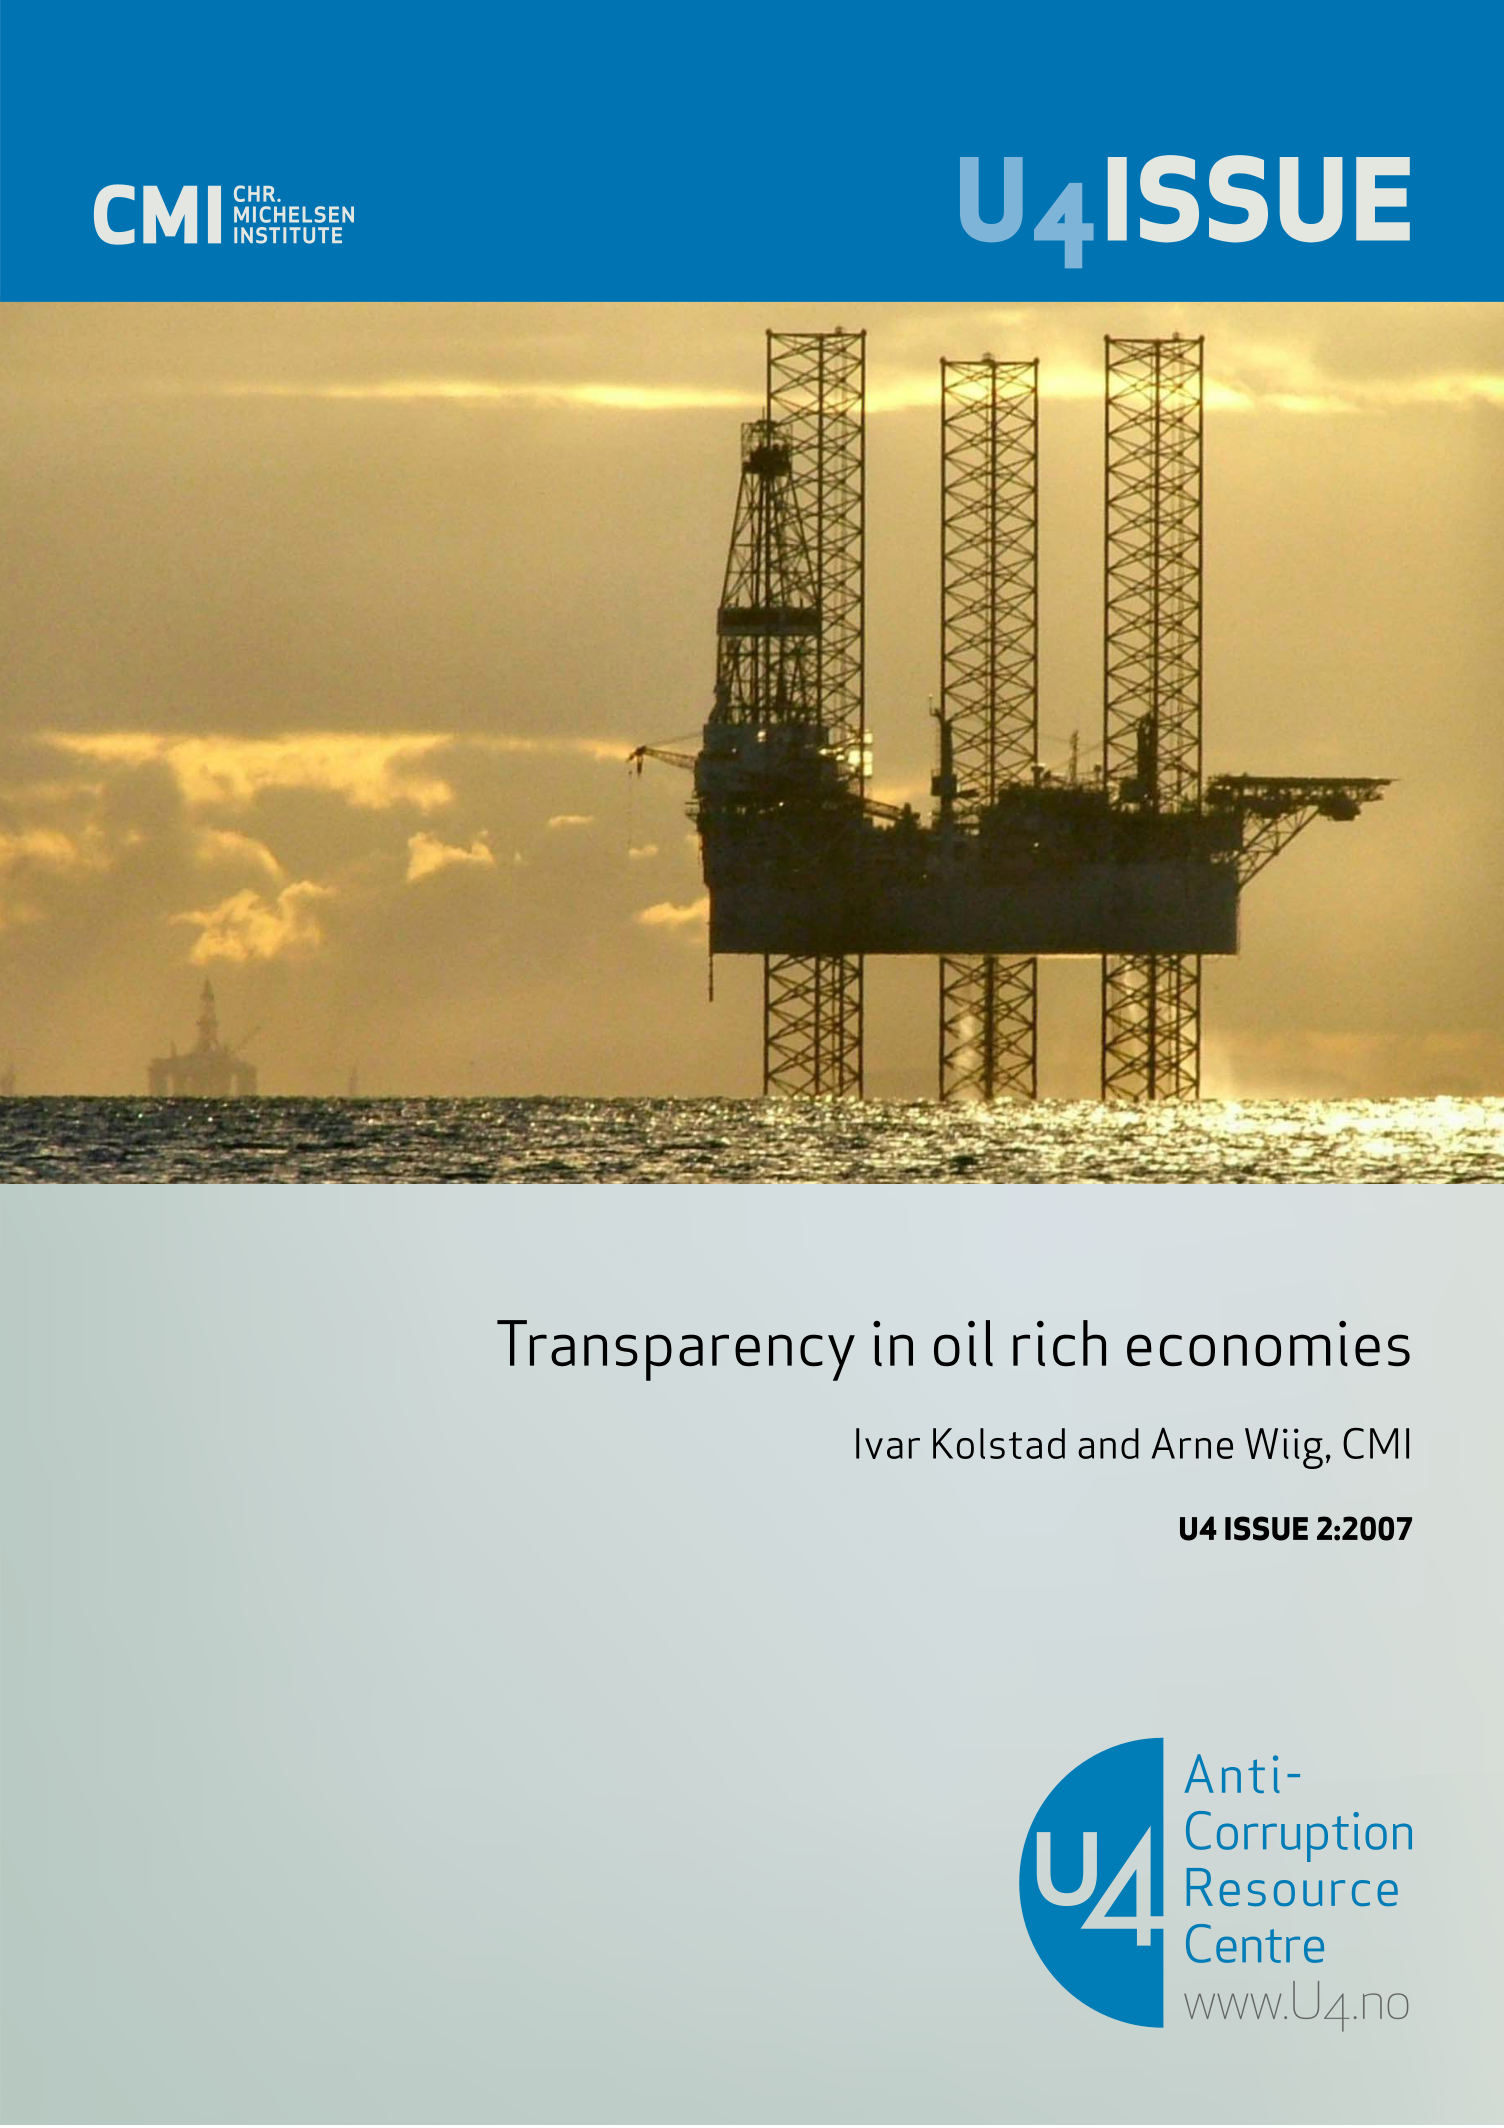 Transparency in oil rich economies